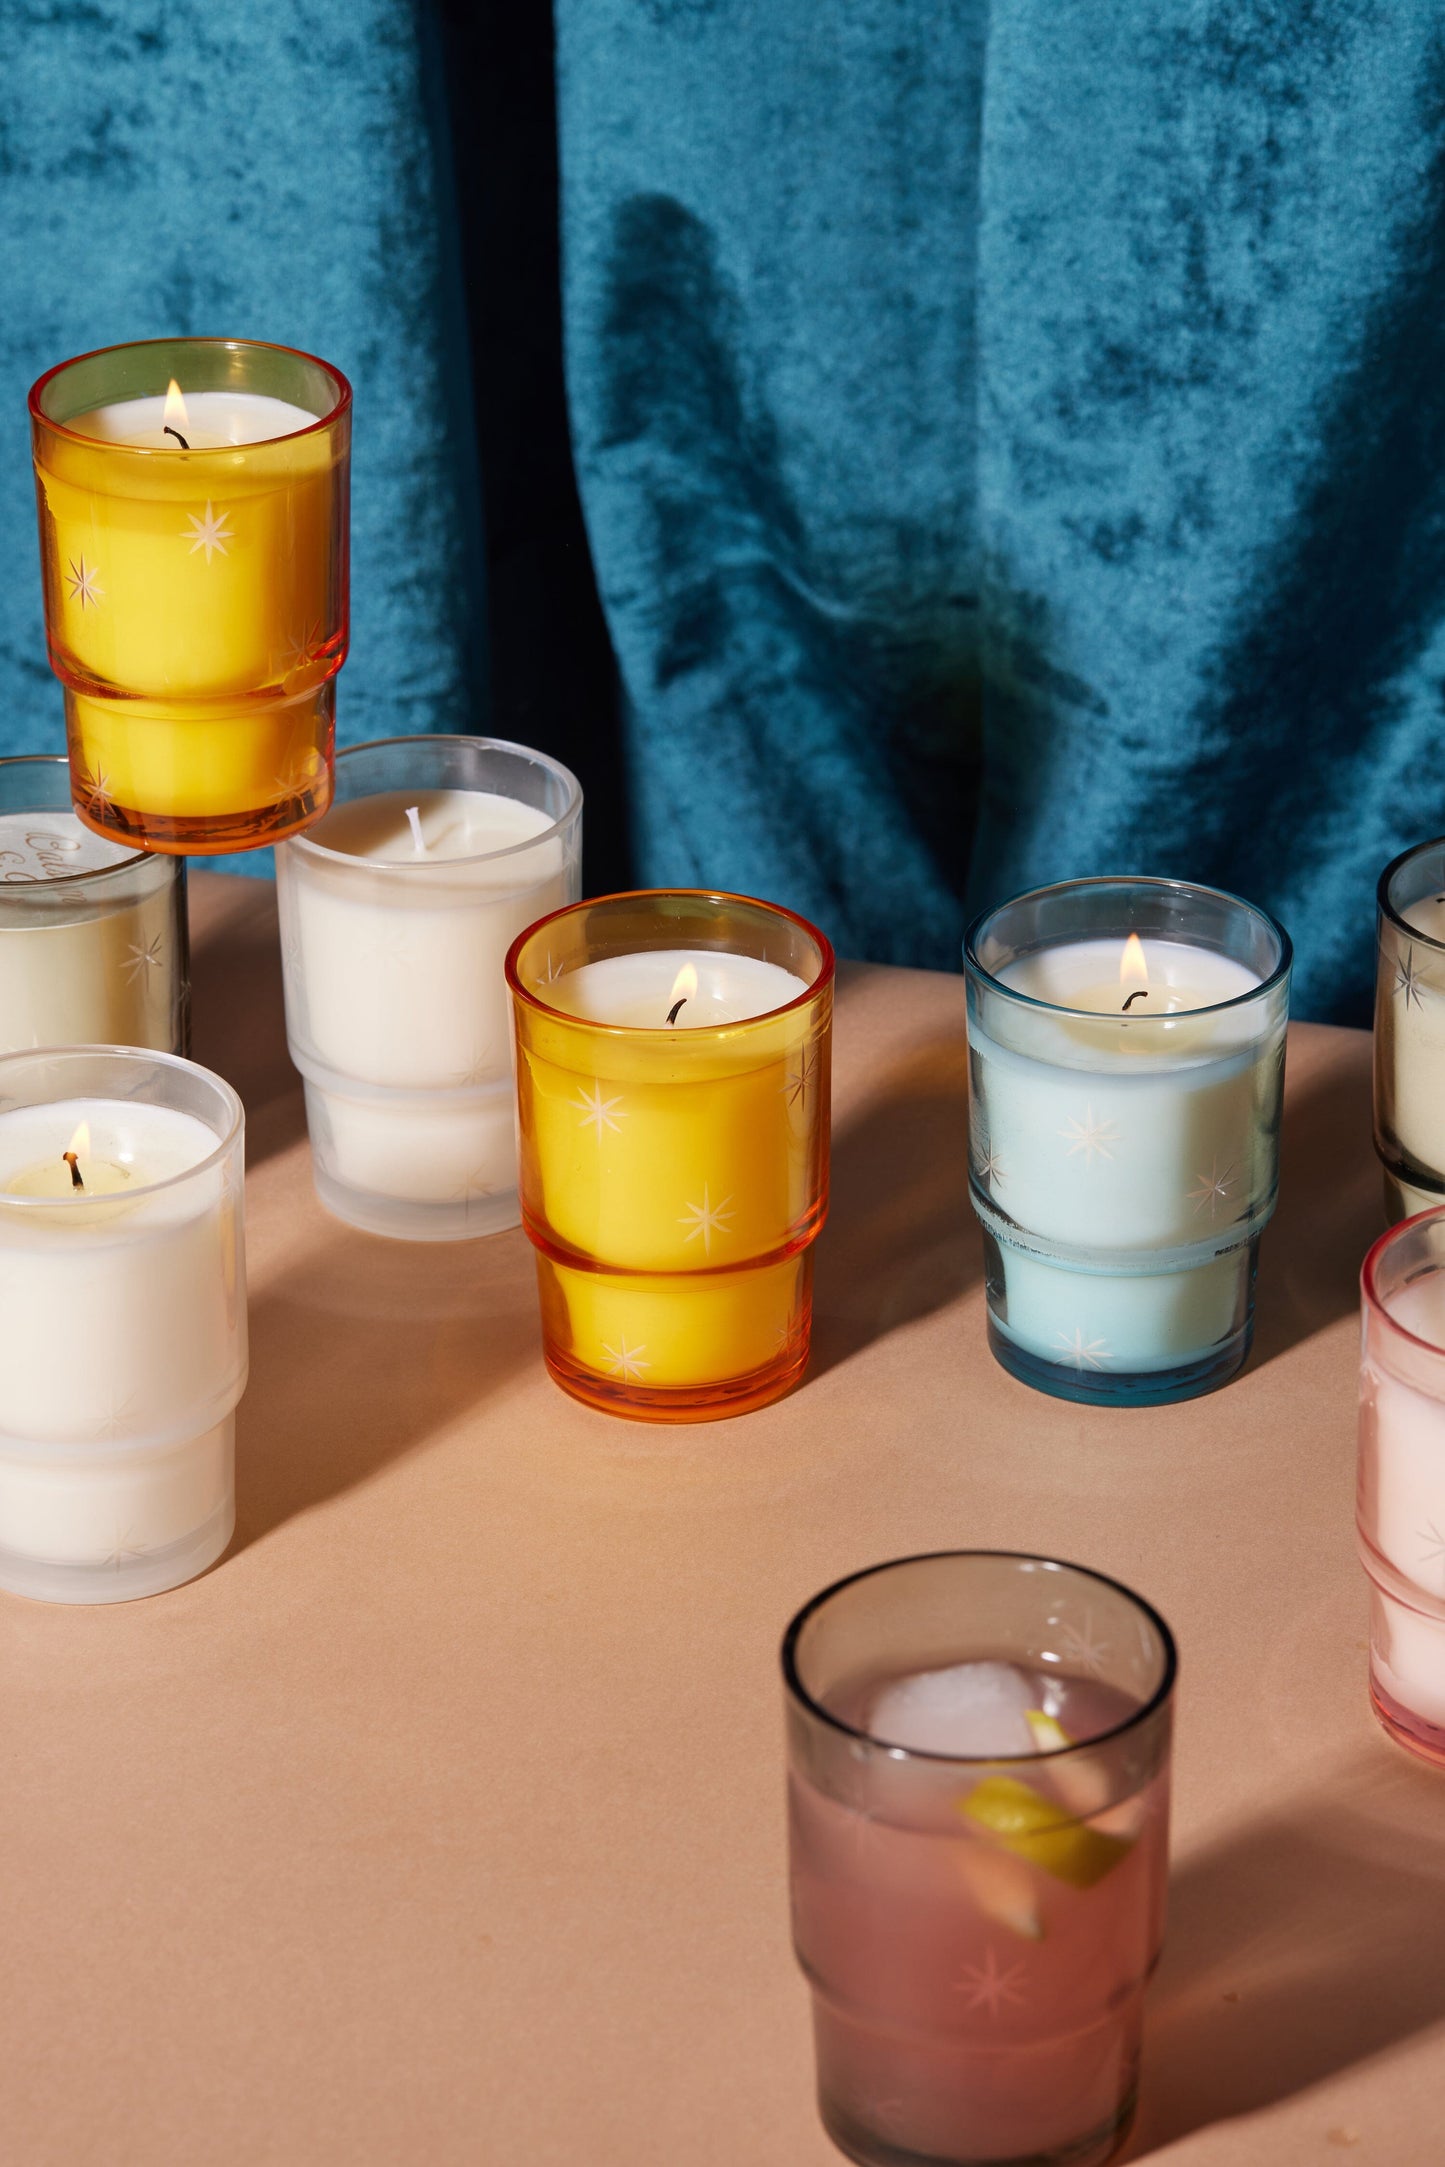 9 Candles showing in the picture - 6 different varieties for purchase.  Candles are shown on a table with a dark blue curtain behind them